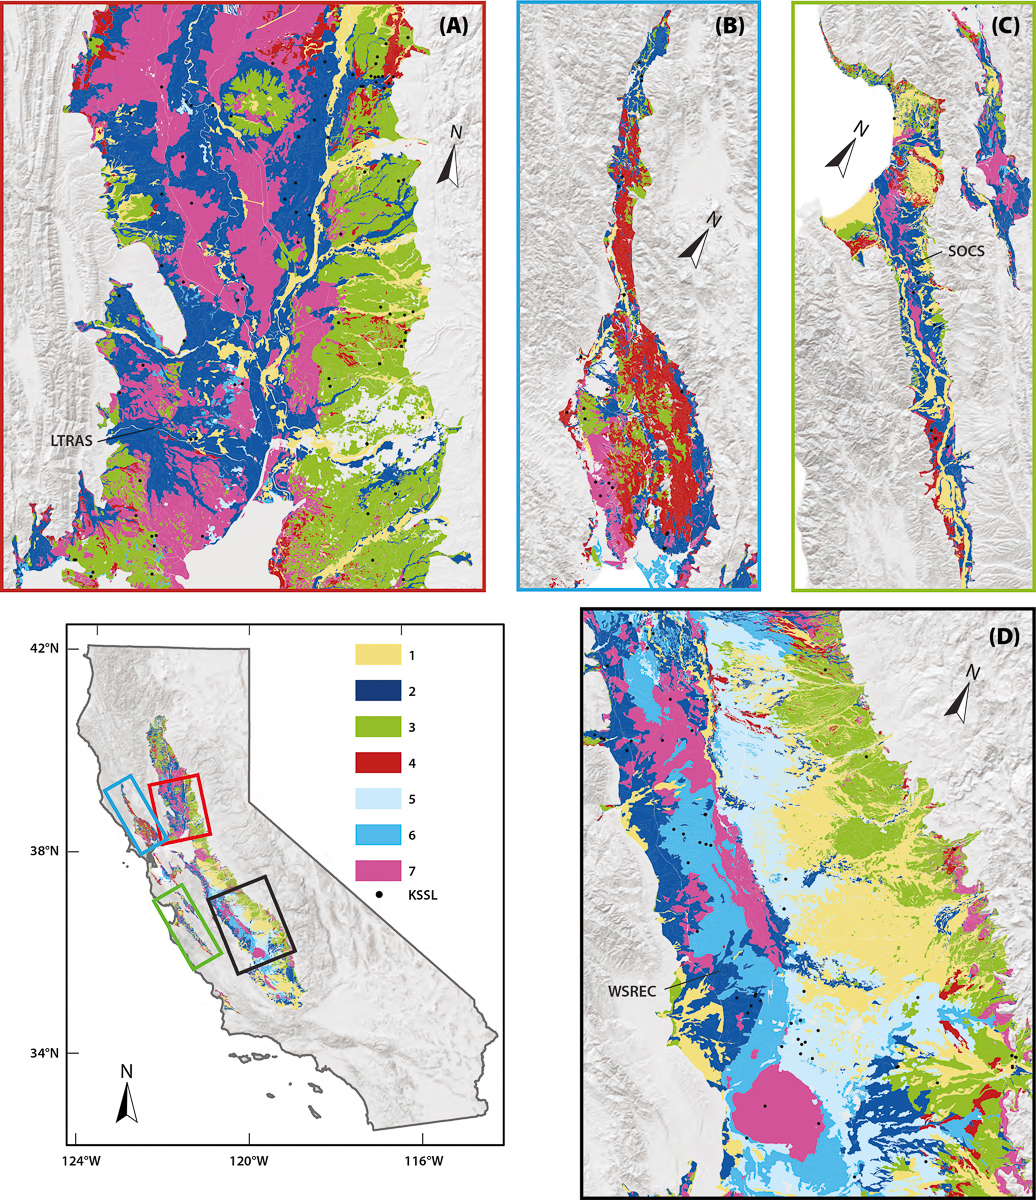 Seven California soil health regions identified from cluster analysis of 10 soil properties derived from USDA-NRCS SSURGO (Soil Survey Geographic) data, highlighting the following: (A) southern Sacramento Valley, (B) Napa and Sonoma valleys (including adjacent hillsides), (C) Salinas, Santa Clara and Pajaro valleys and (D) central and southern San Joaquin Valley. Locations of Kellogg Soil Survey Laboratory (KSSL) points and three soil health experiments are depicted: the Long Term Research in Agricultural Sustainability (LTRAS), Salinas Organic Cropping Systems (SOCS) and UC West Side Research and Extension Center (WSREC). Soil health regions: 1 = Coarse with no restrictions, 2 = loamy with no restrictions, 3 = low organic matter (OM) with restrictive horizons, 4 = high OM with restrictive horizons, 5 = coarse-loamy salt-affected, 6 = fine salt-affected and 7 = shrink-swell.